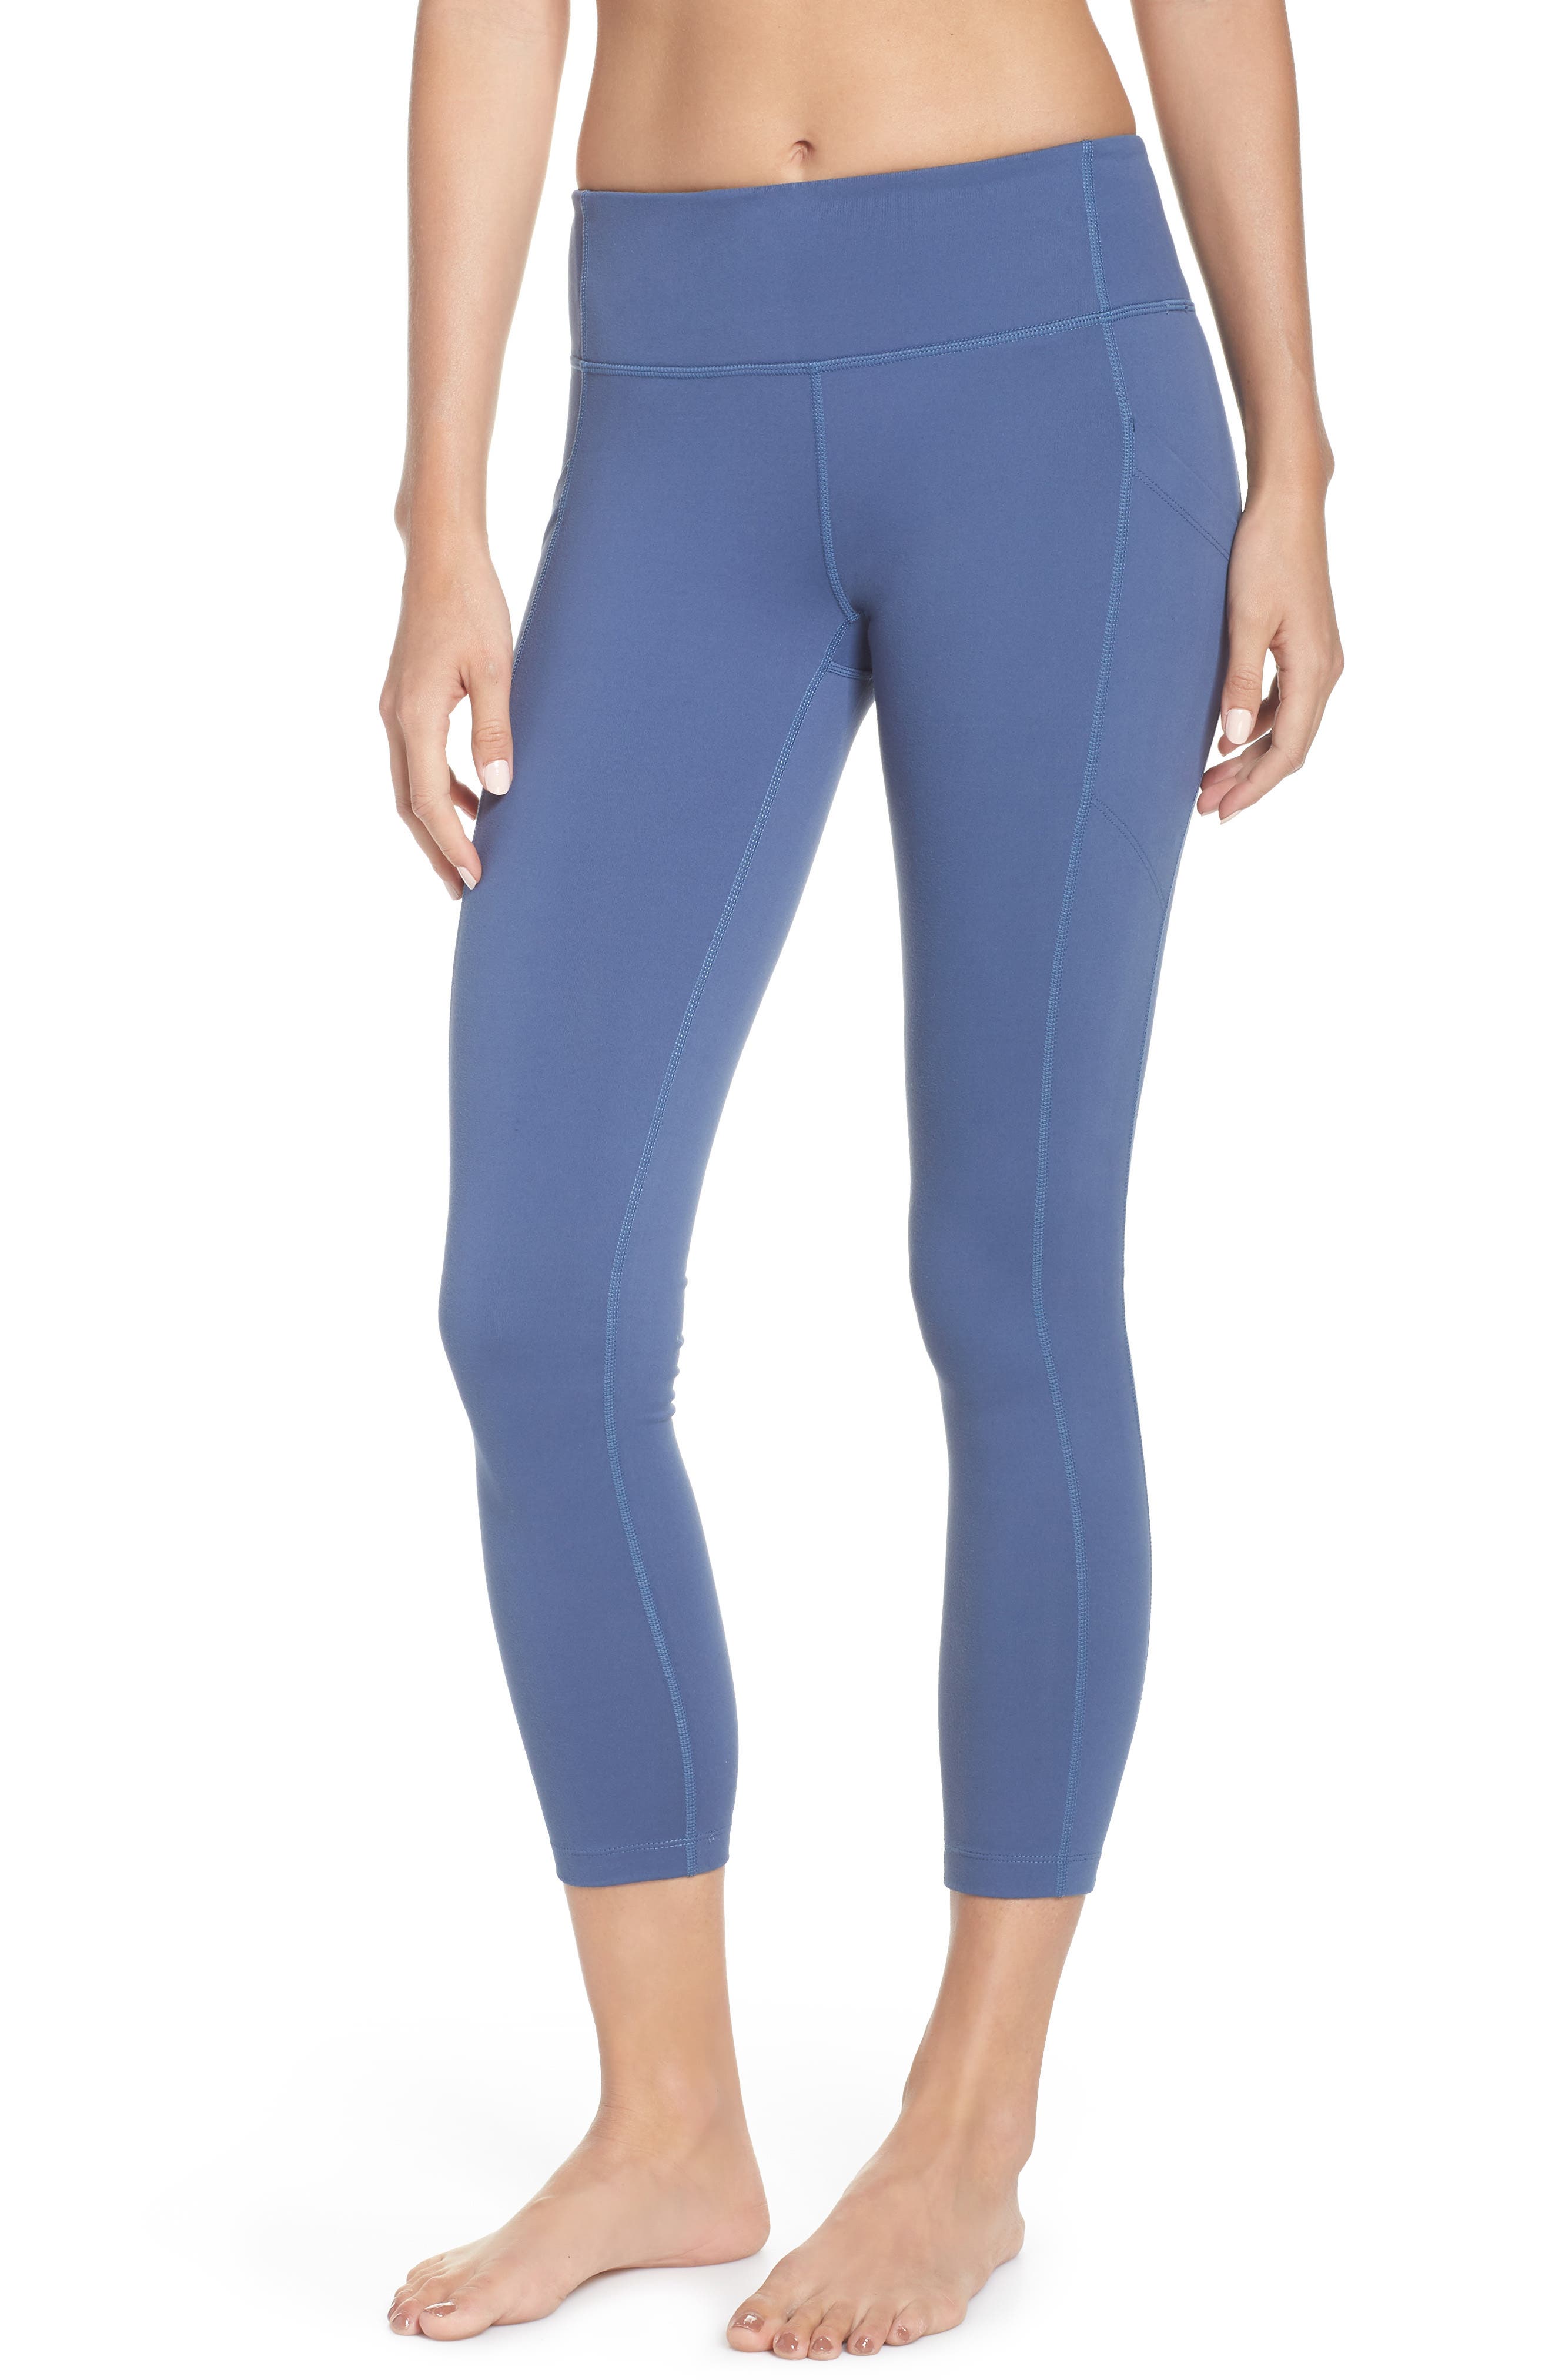 Top-rated Zella leggings are 40% off at Nordstrom right now: 'Best